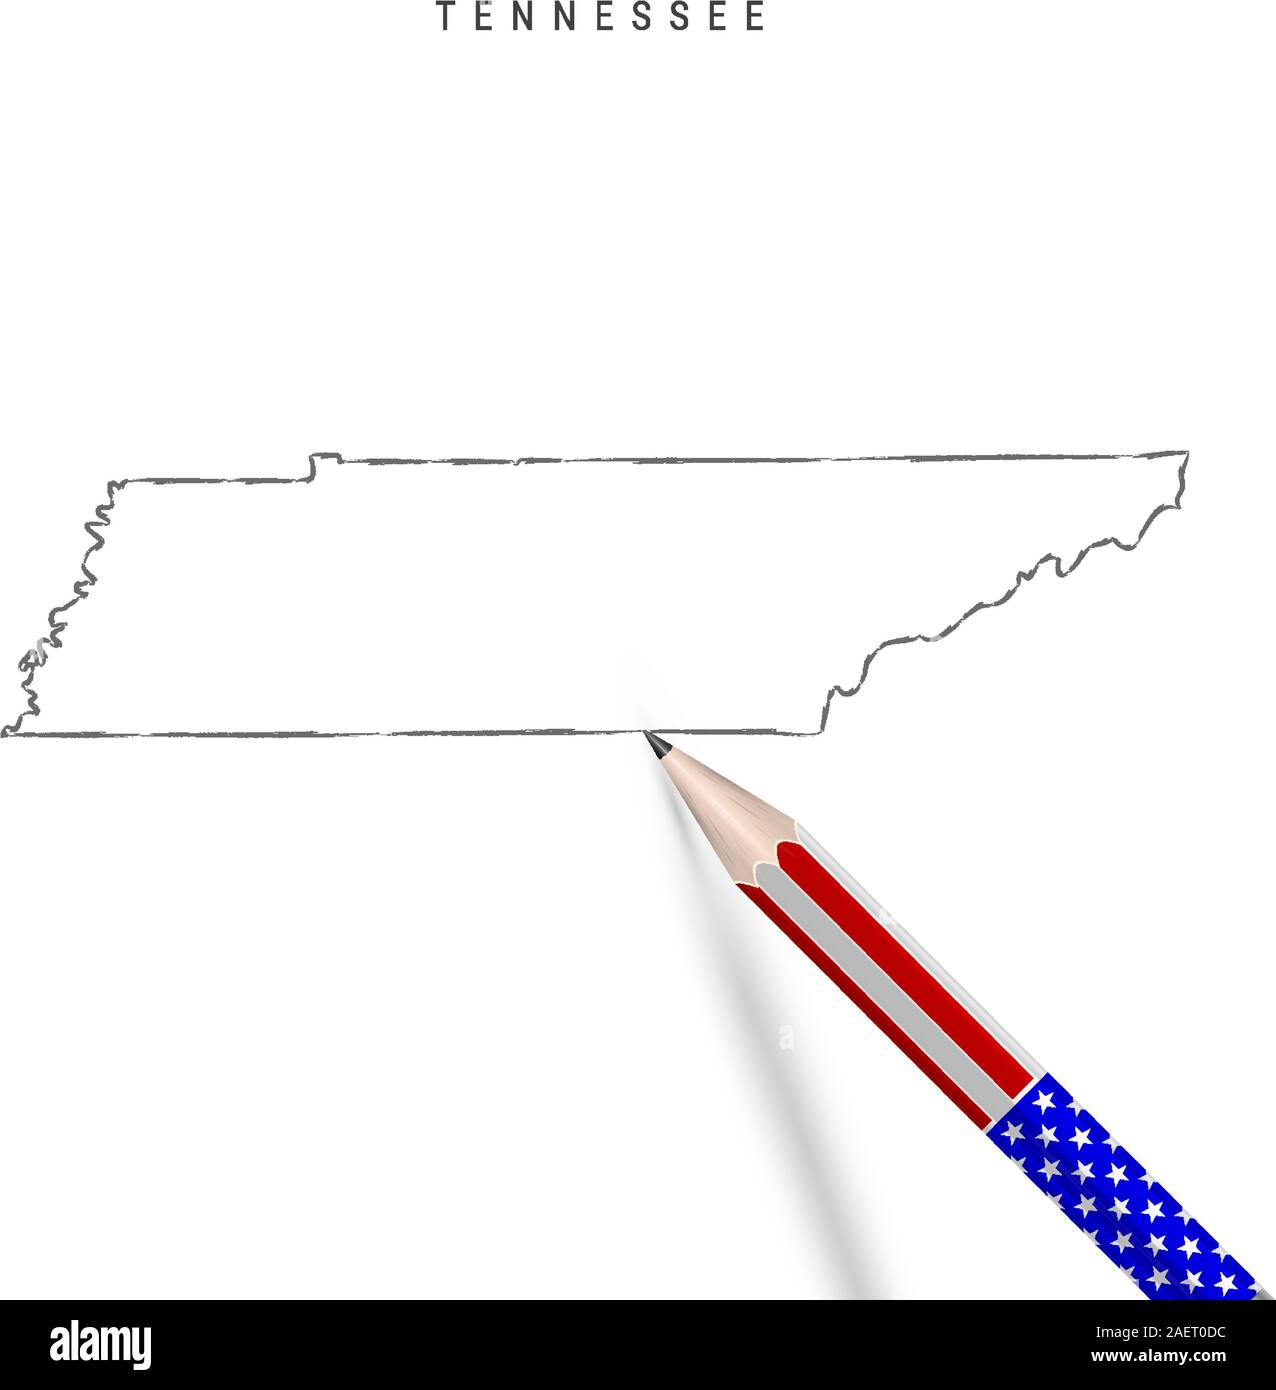 Tennessee US state vector map pencil sketch. Tennessee outline contour